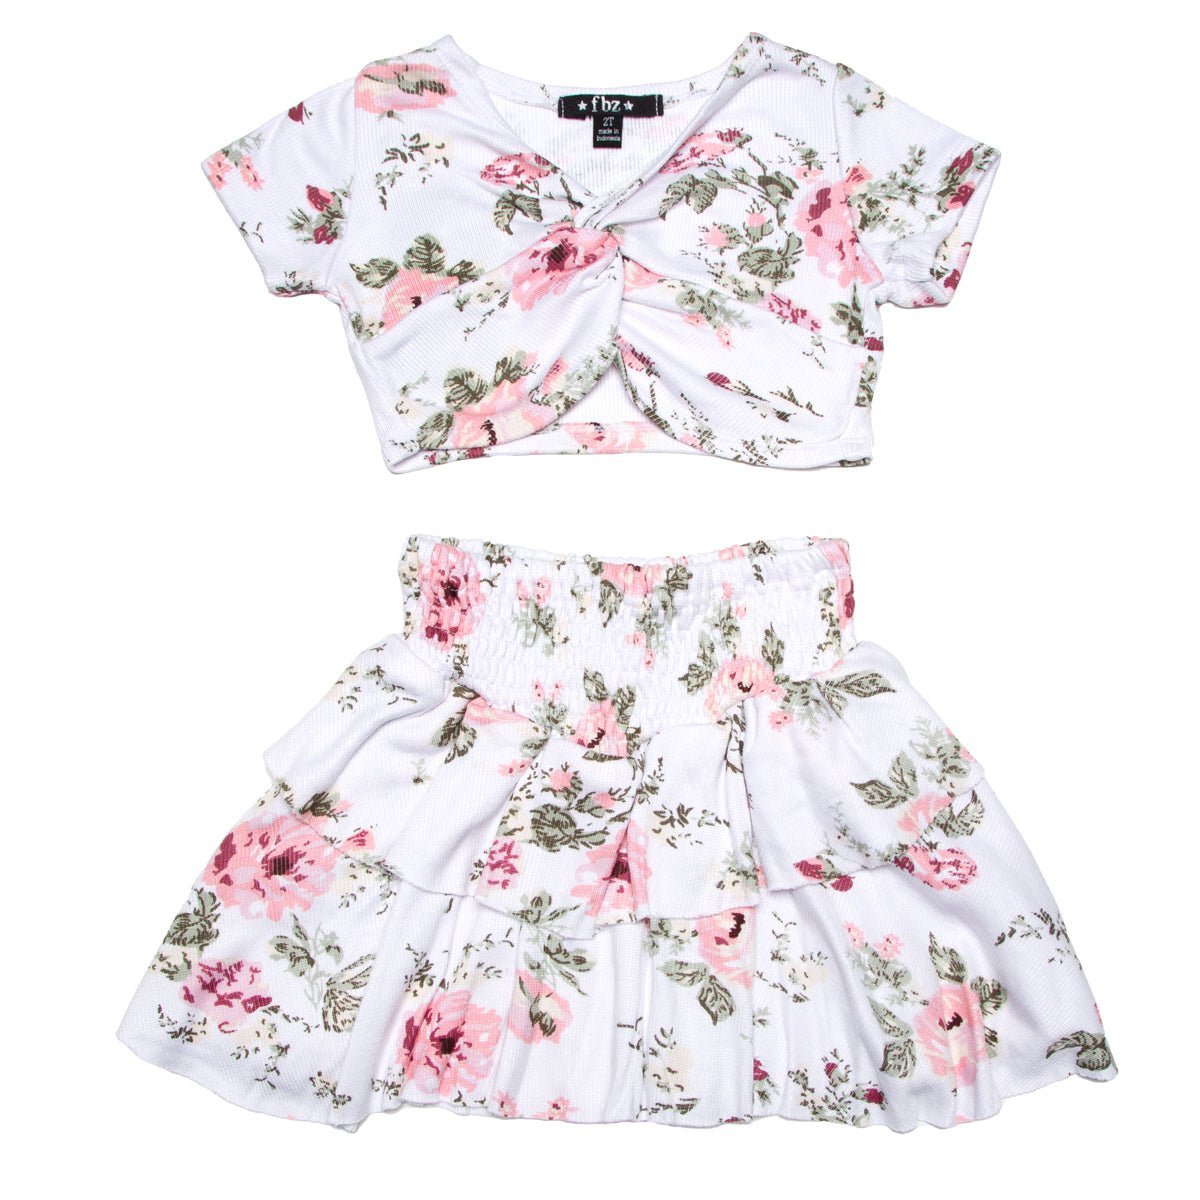 FLORAL CROPPED TOP AND RUFFLE SKIRT SET - SET